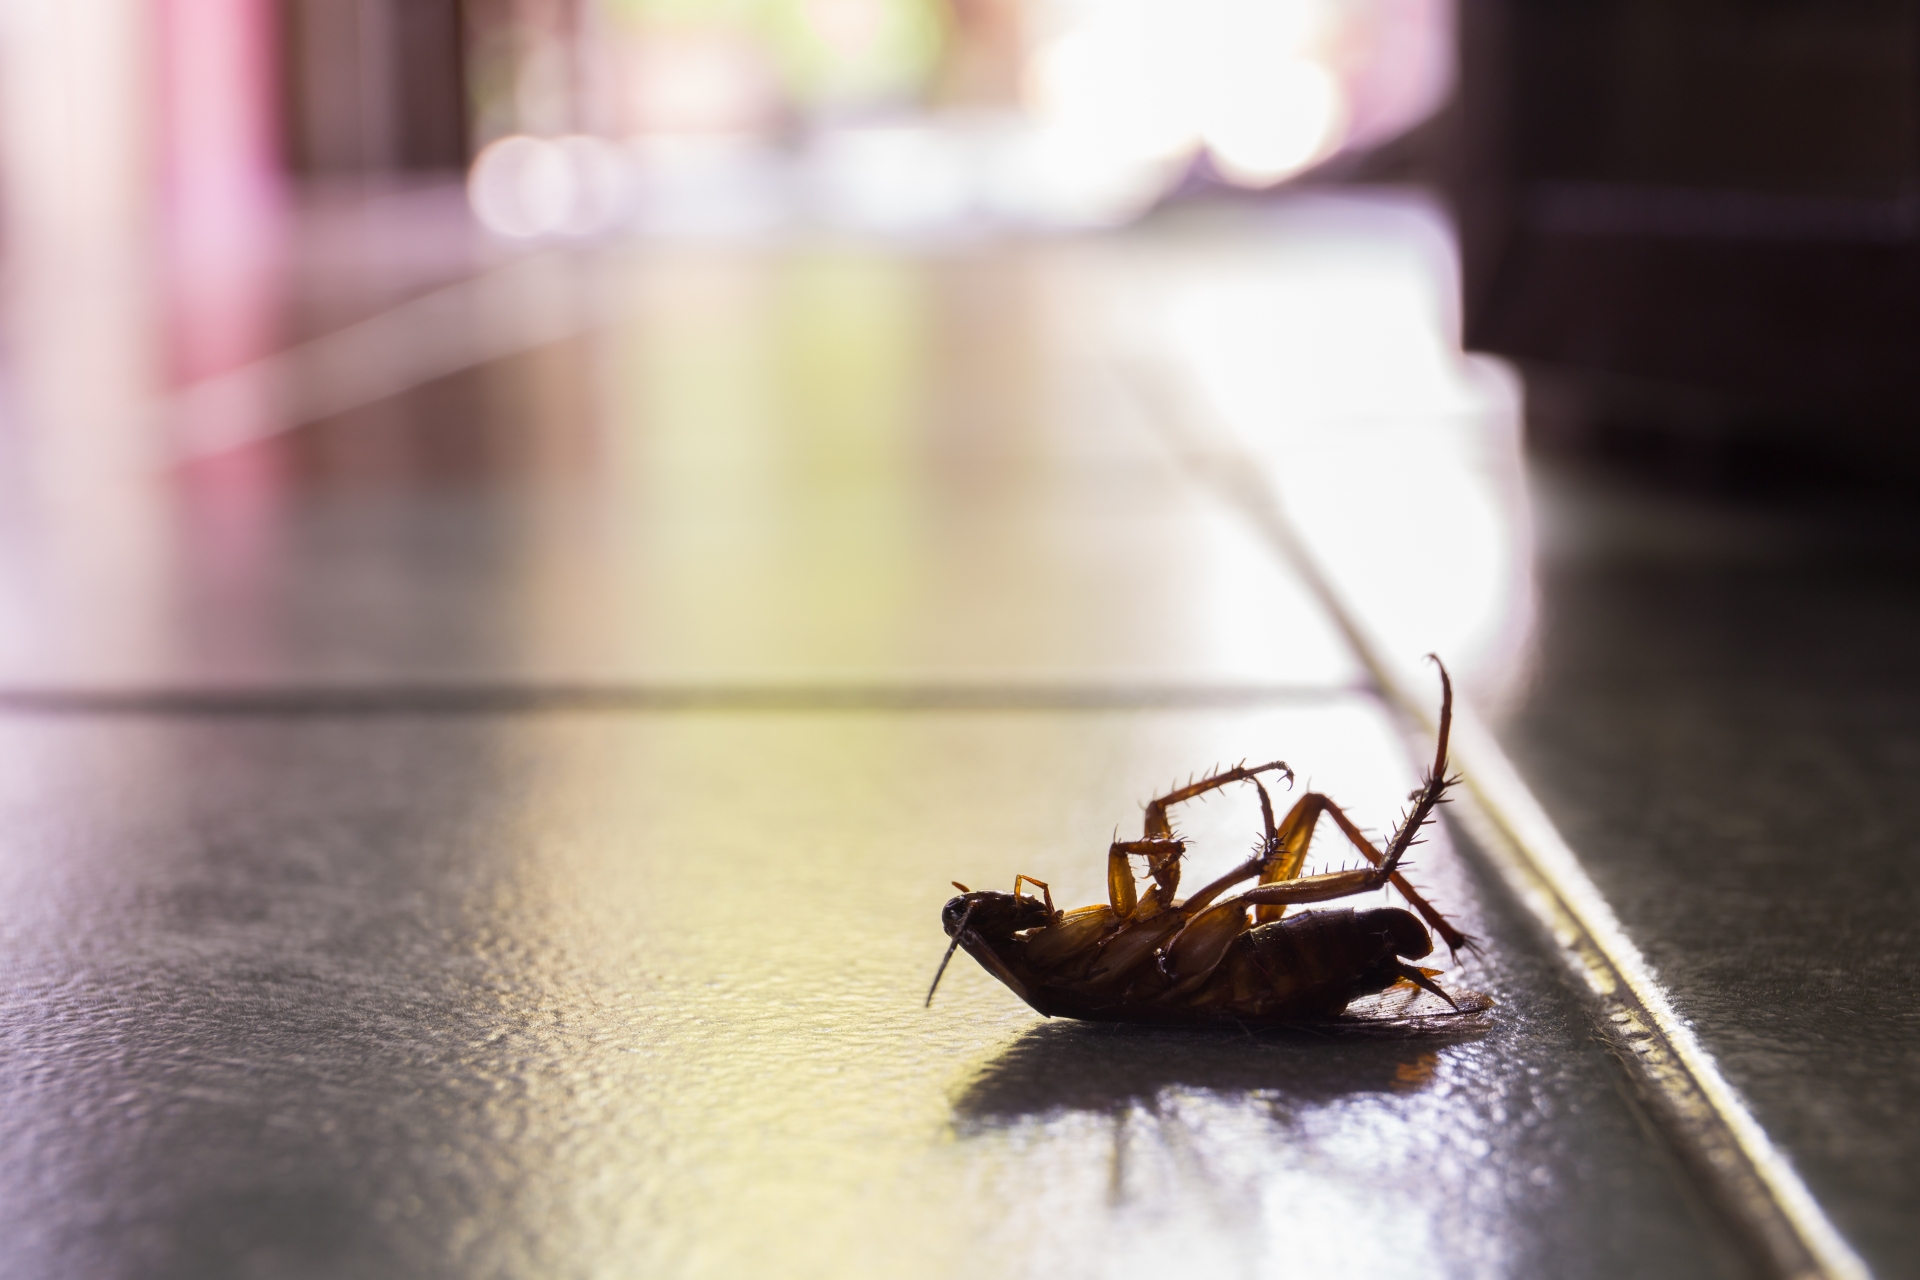 Cockroach Control, Pest Control in Grove Park, SE12. Call Now 020 8166 9746